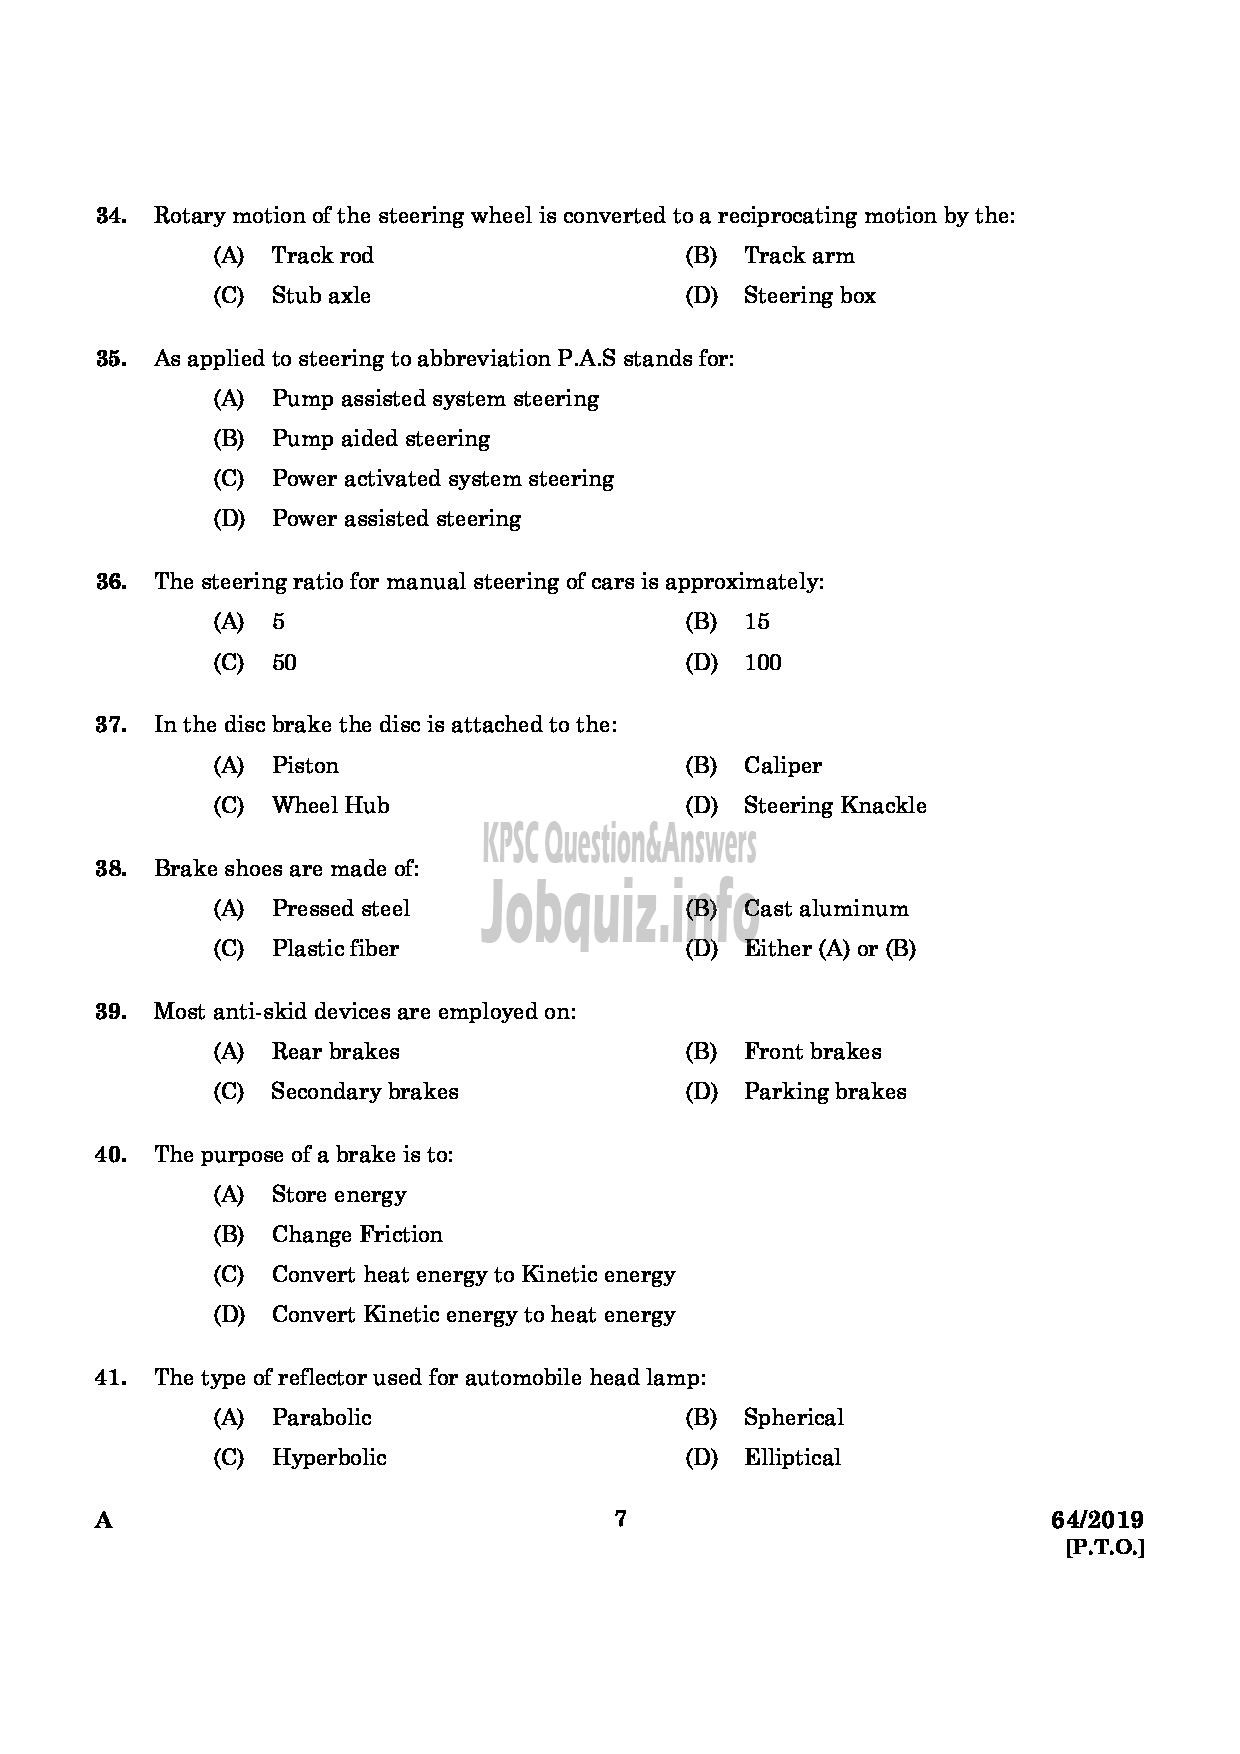 Kerala PSC Question Paper - DRILLING ASSISTANT GROUND WATER DEPARTMENT English -5